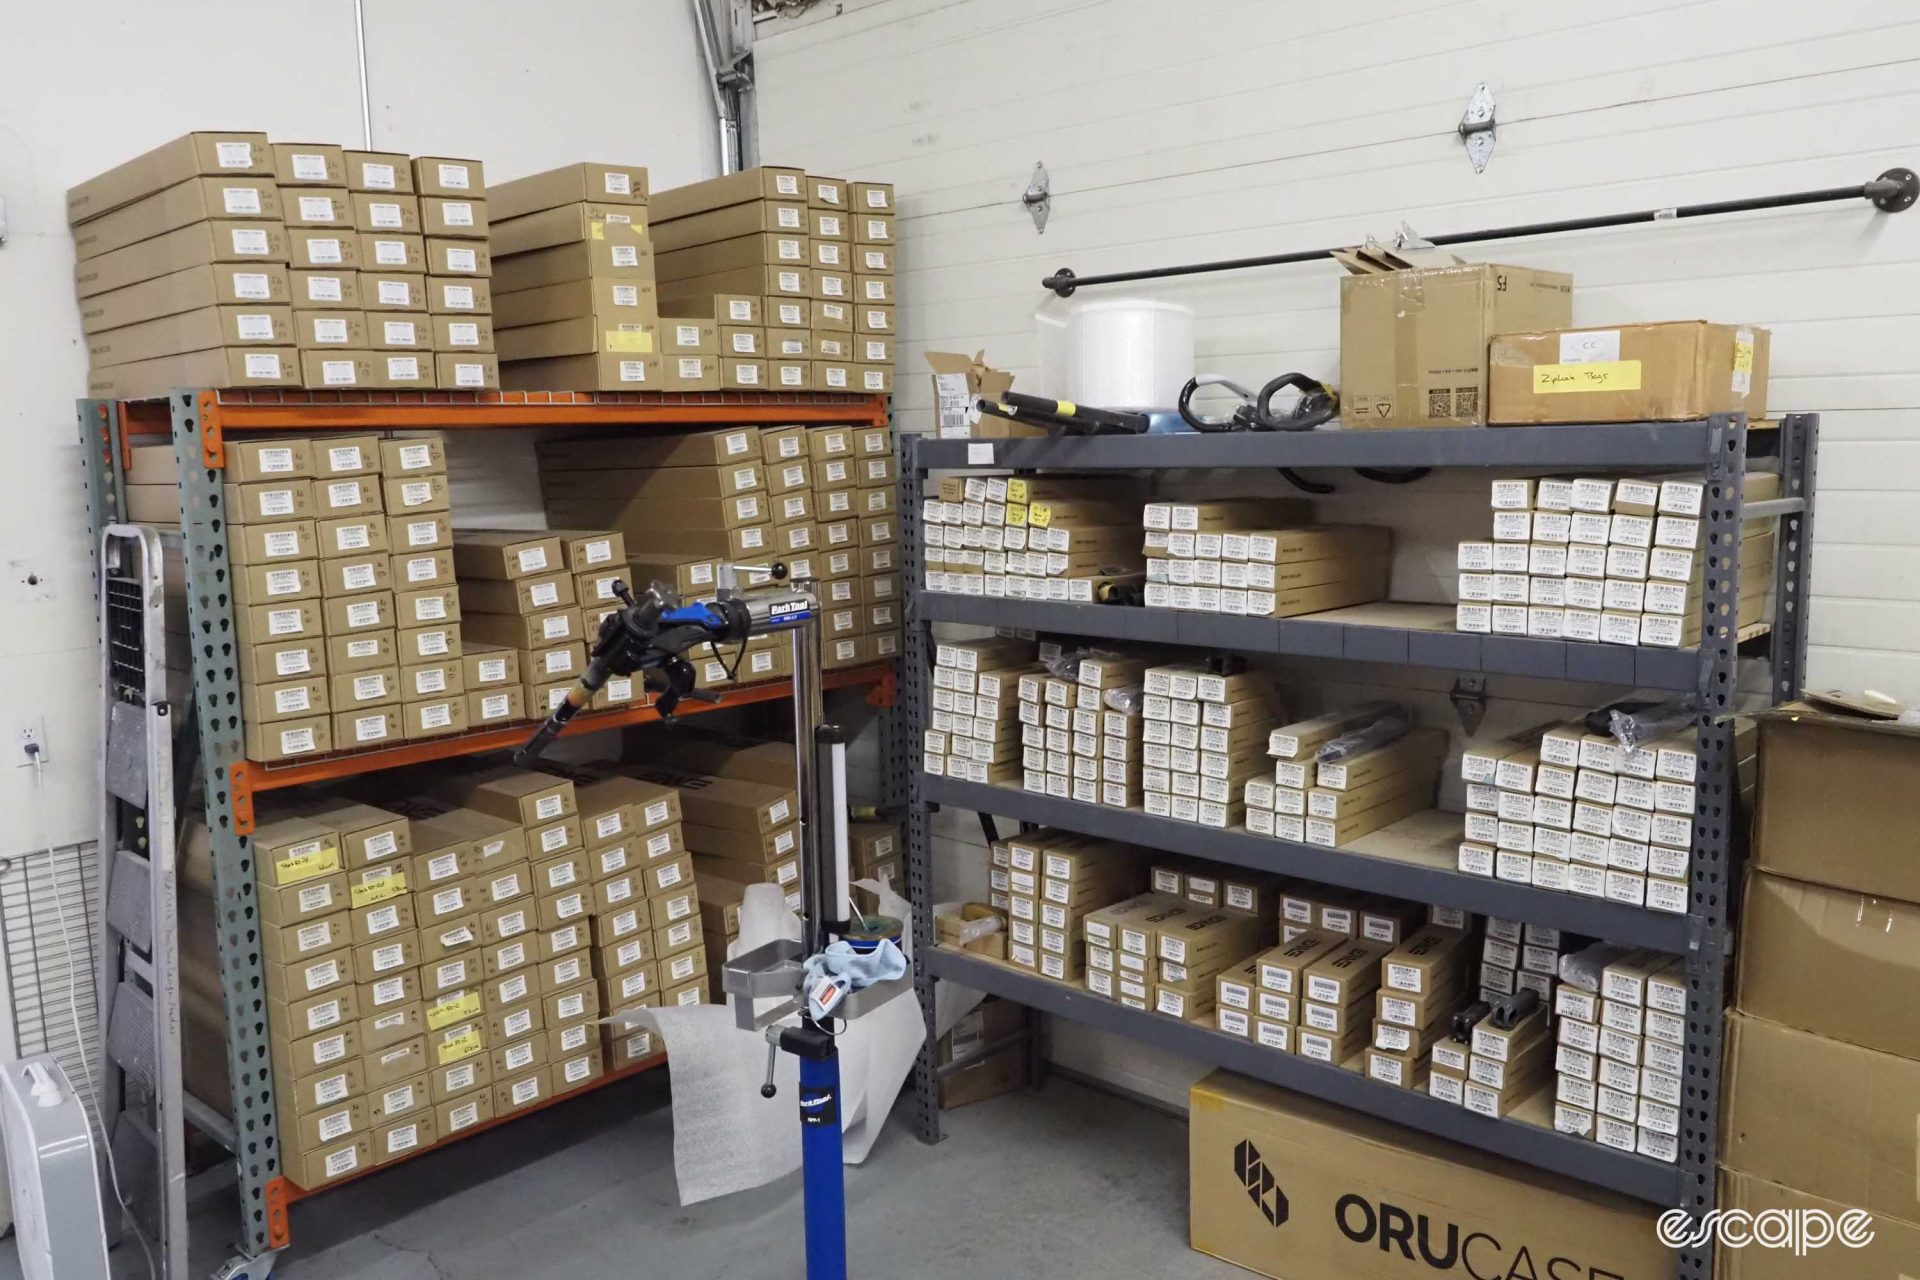 Boxes and boxes of different kind of forks sit stacked on shelving.